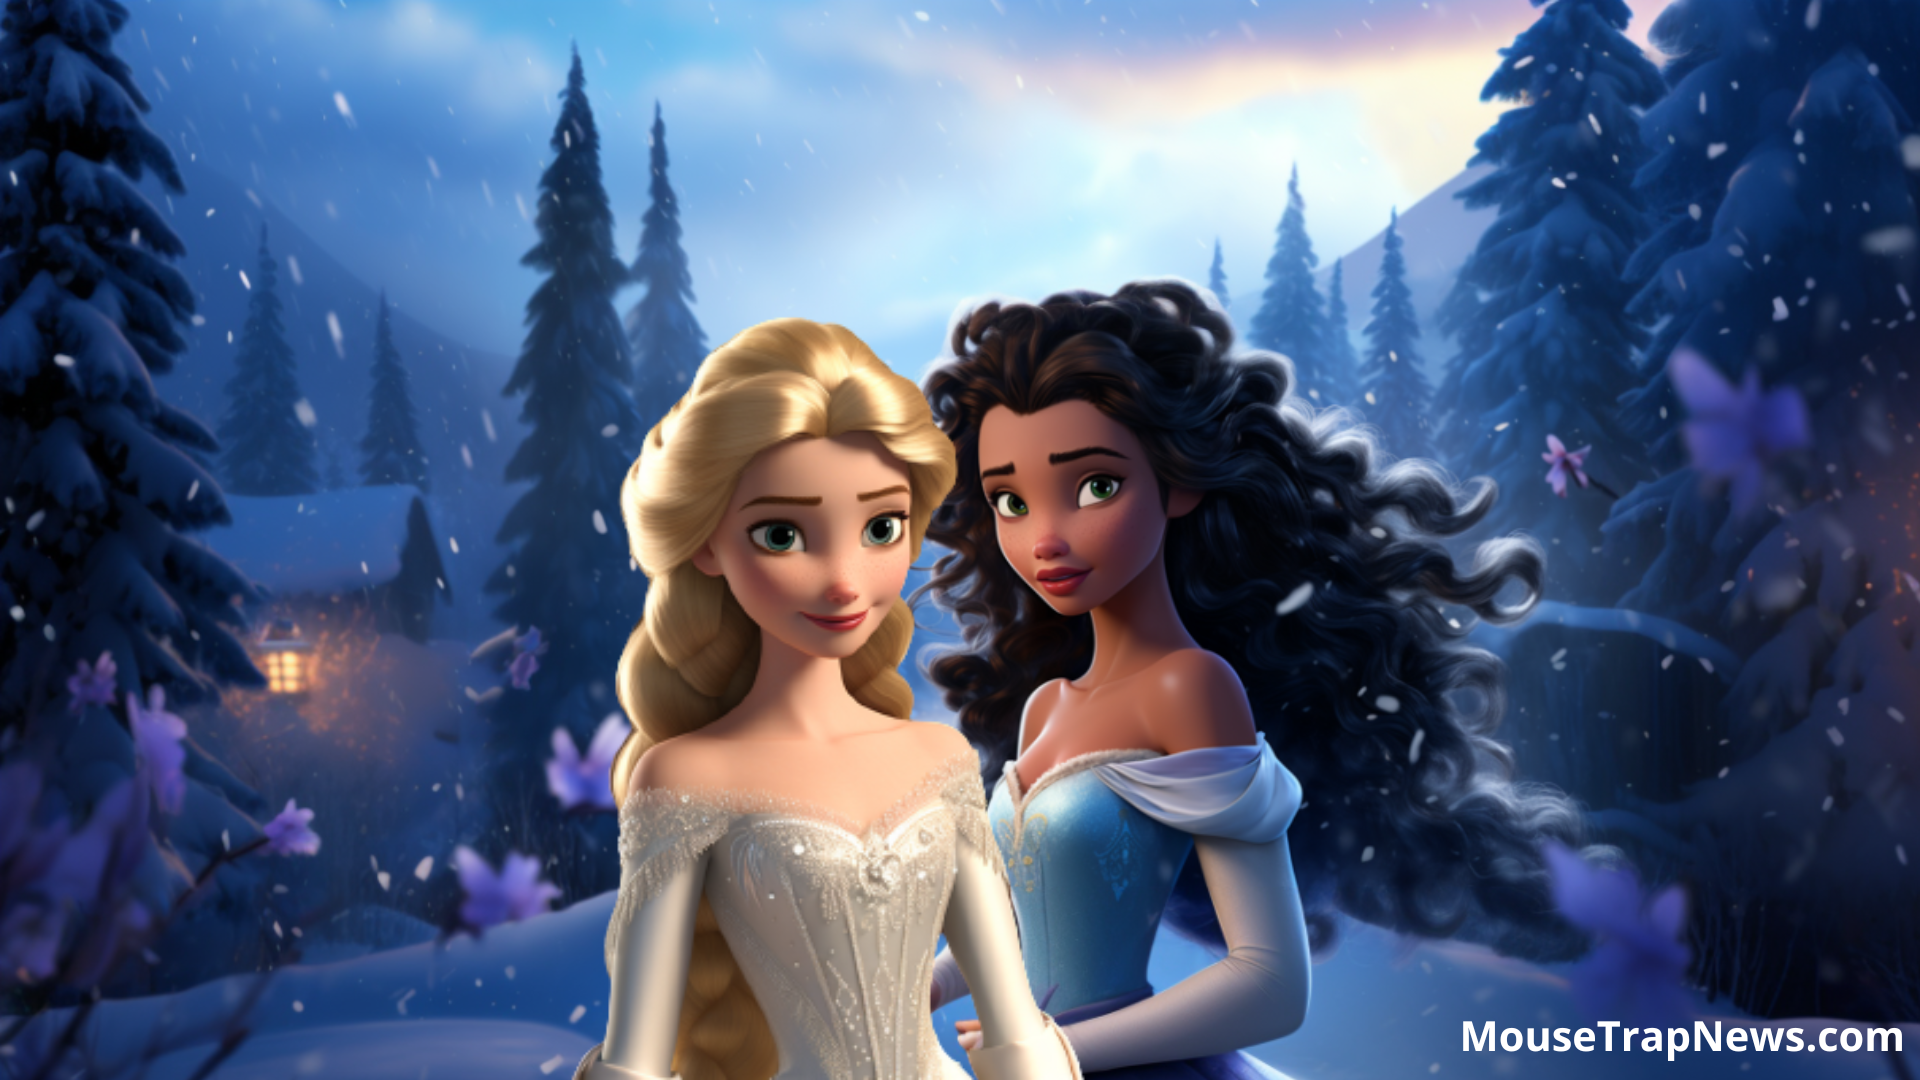 Elsa gets married to a woman in Frozen 3, early concept art